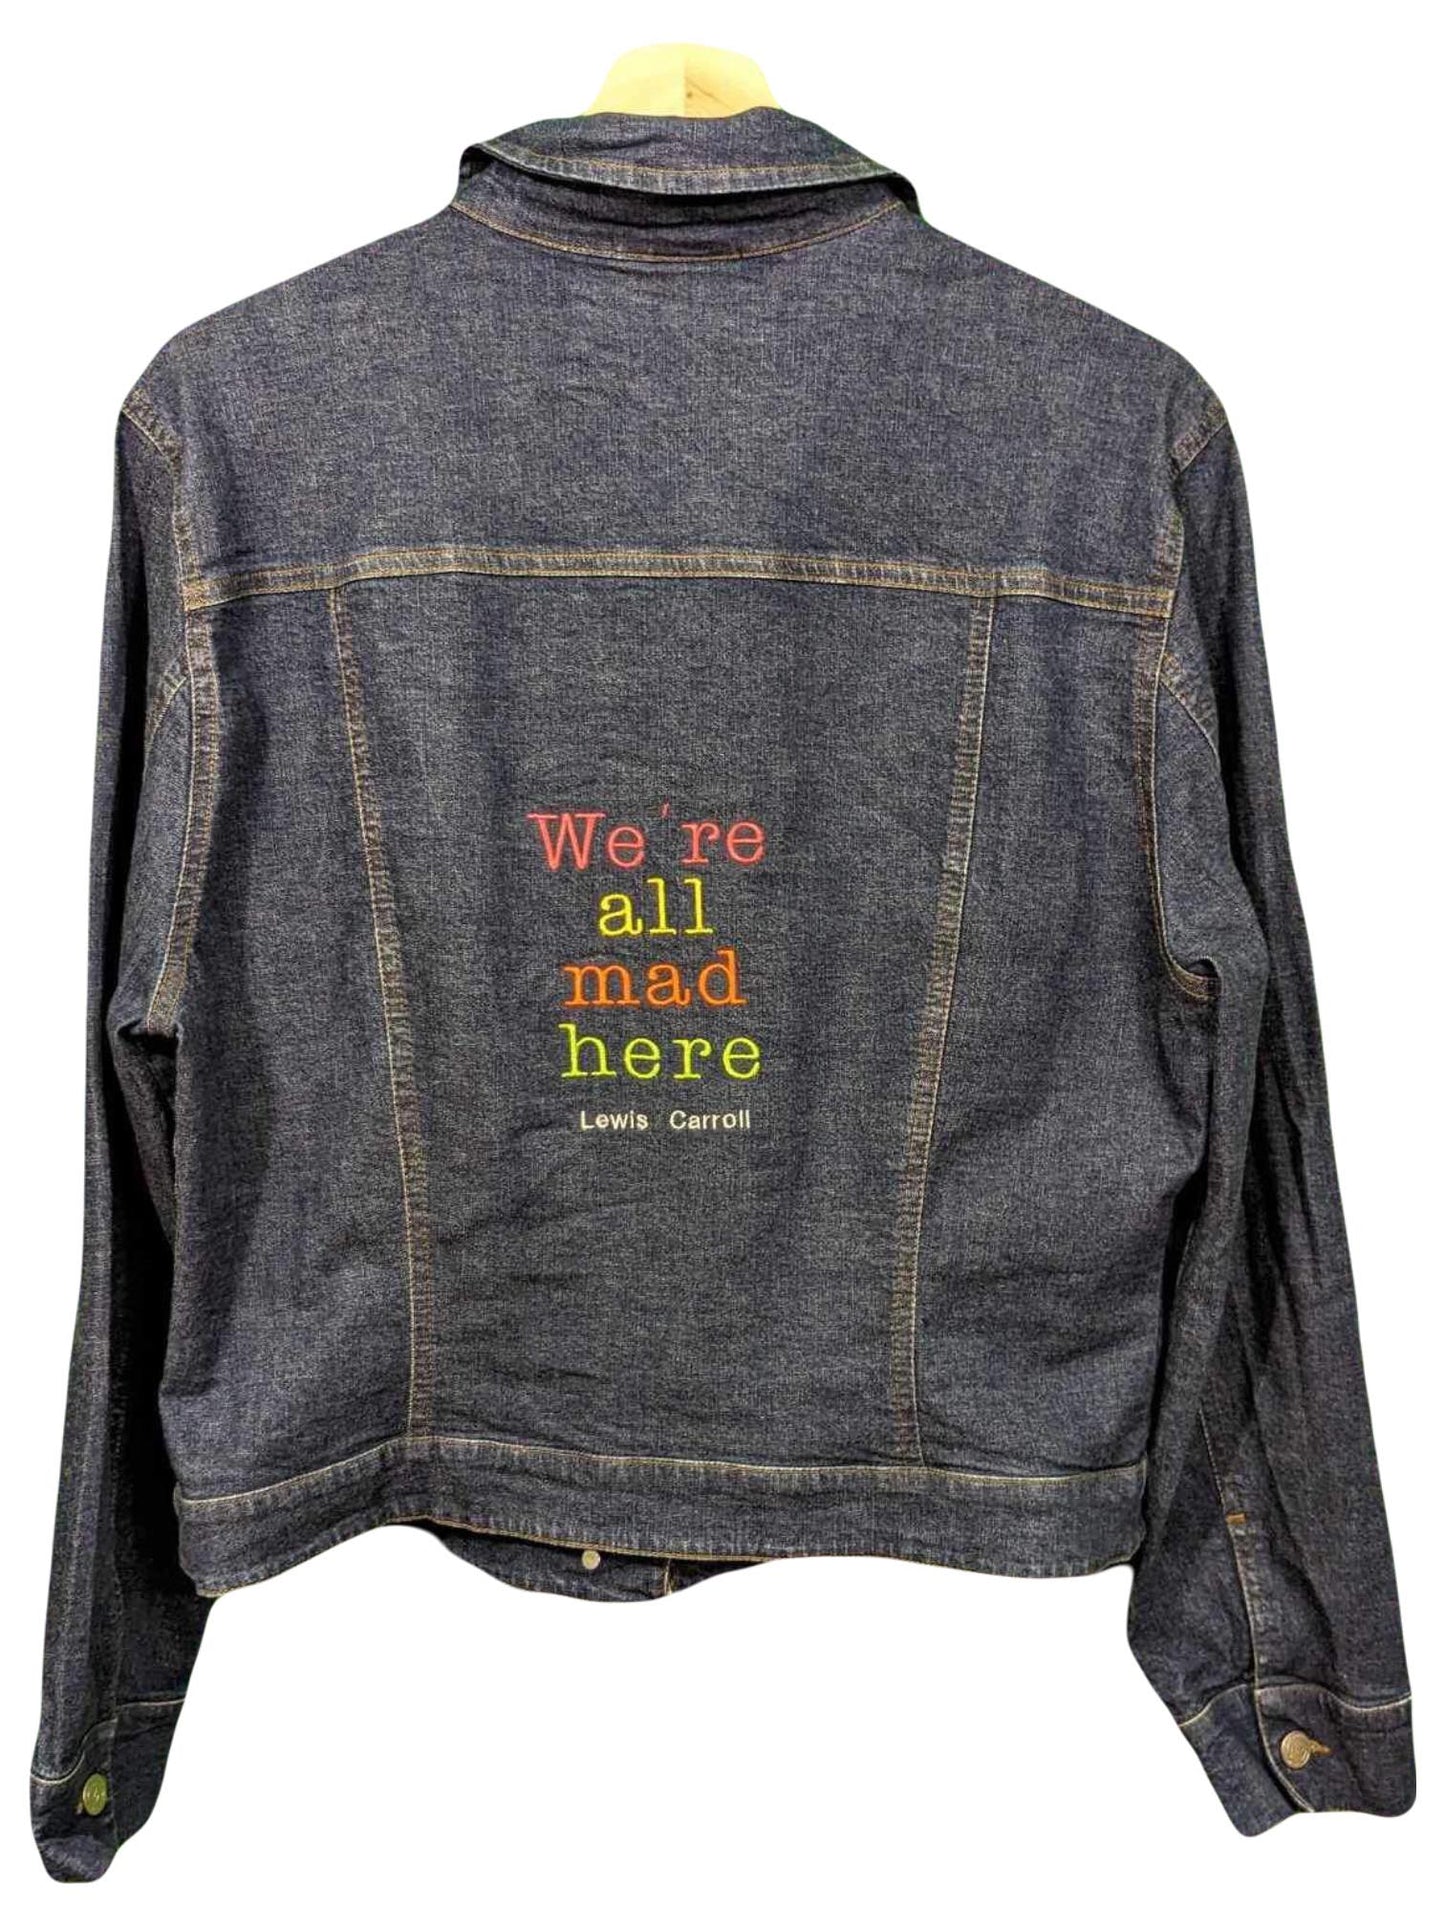 Size 14 Lewis Carroll Denim Jacket - Rainbow Thread - We're All Mad Here Bookish Alice in Wonderland Quote